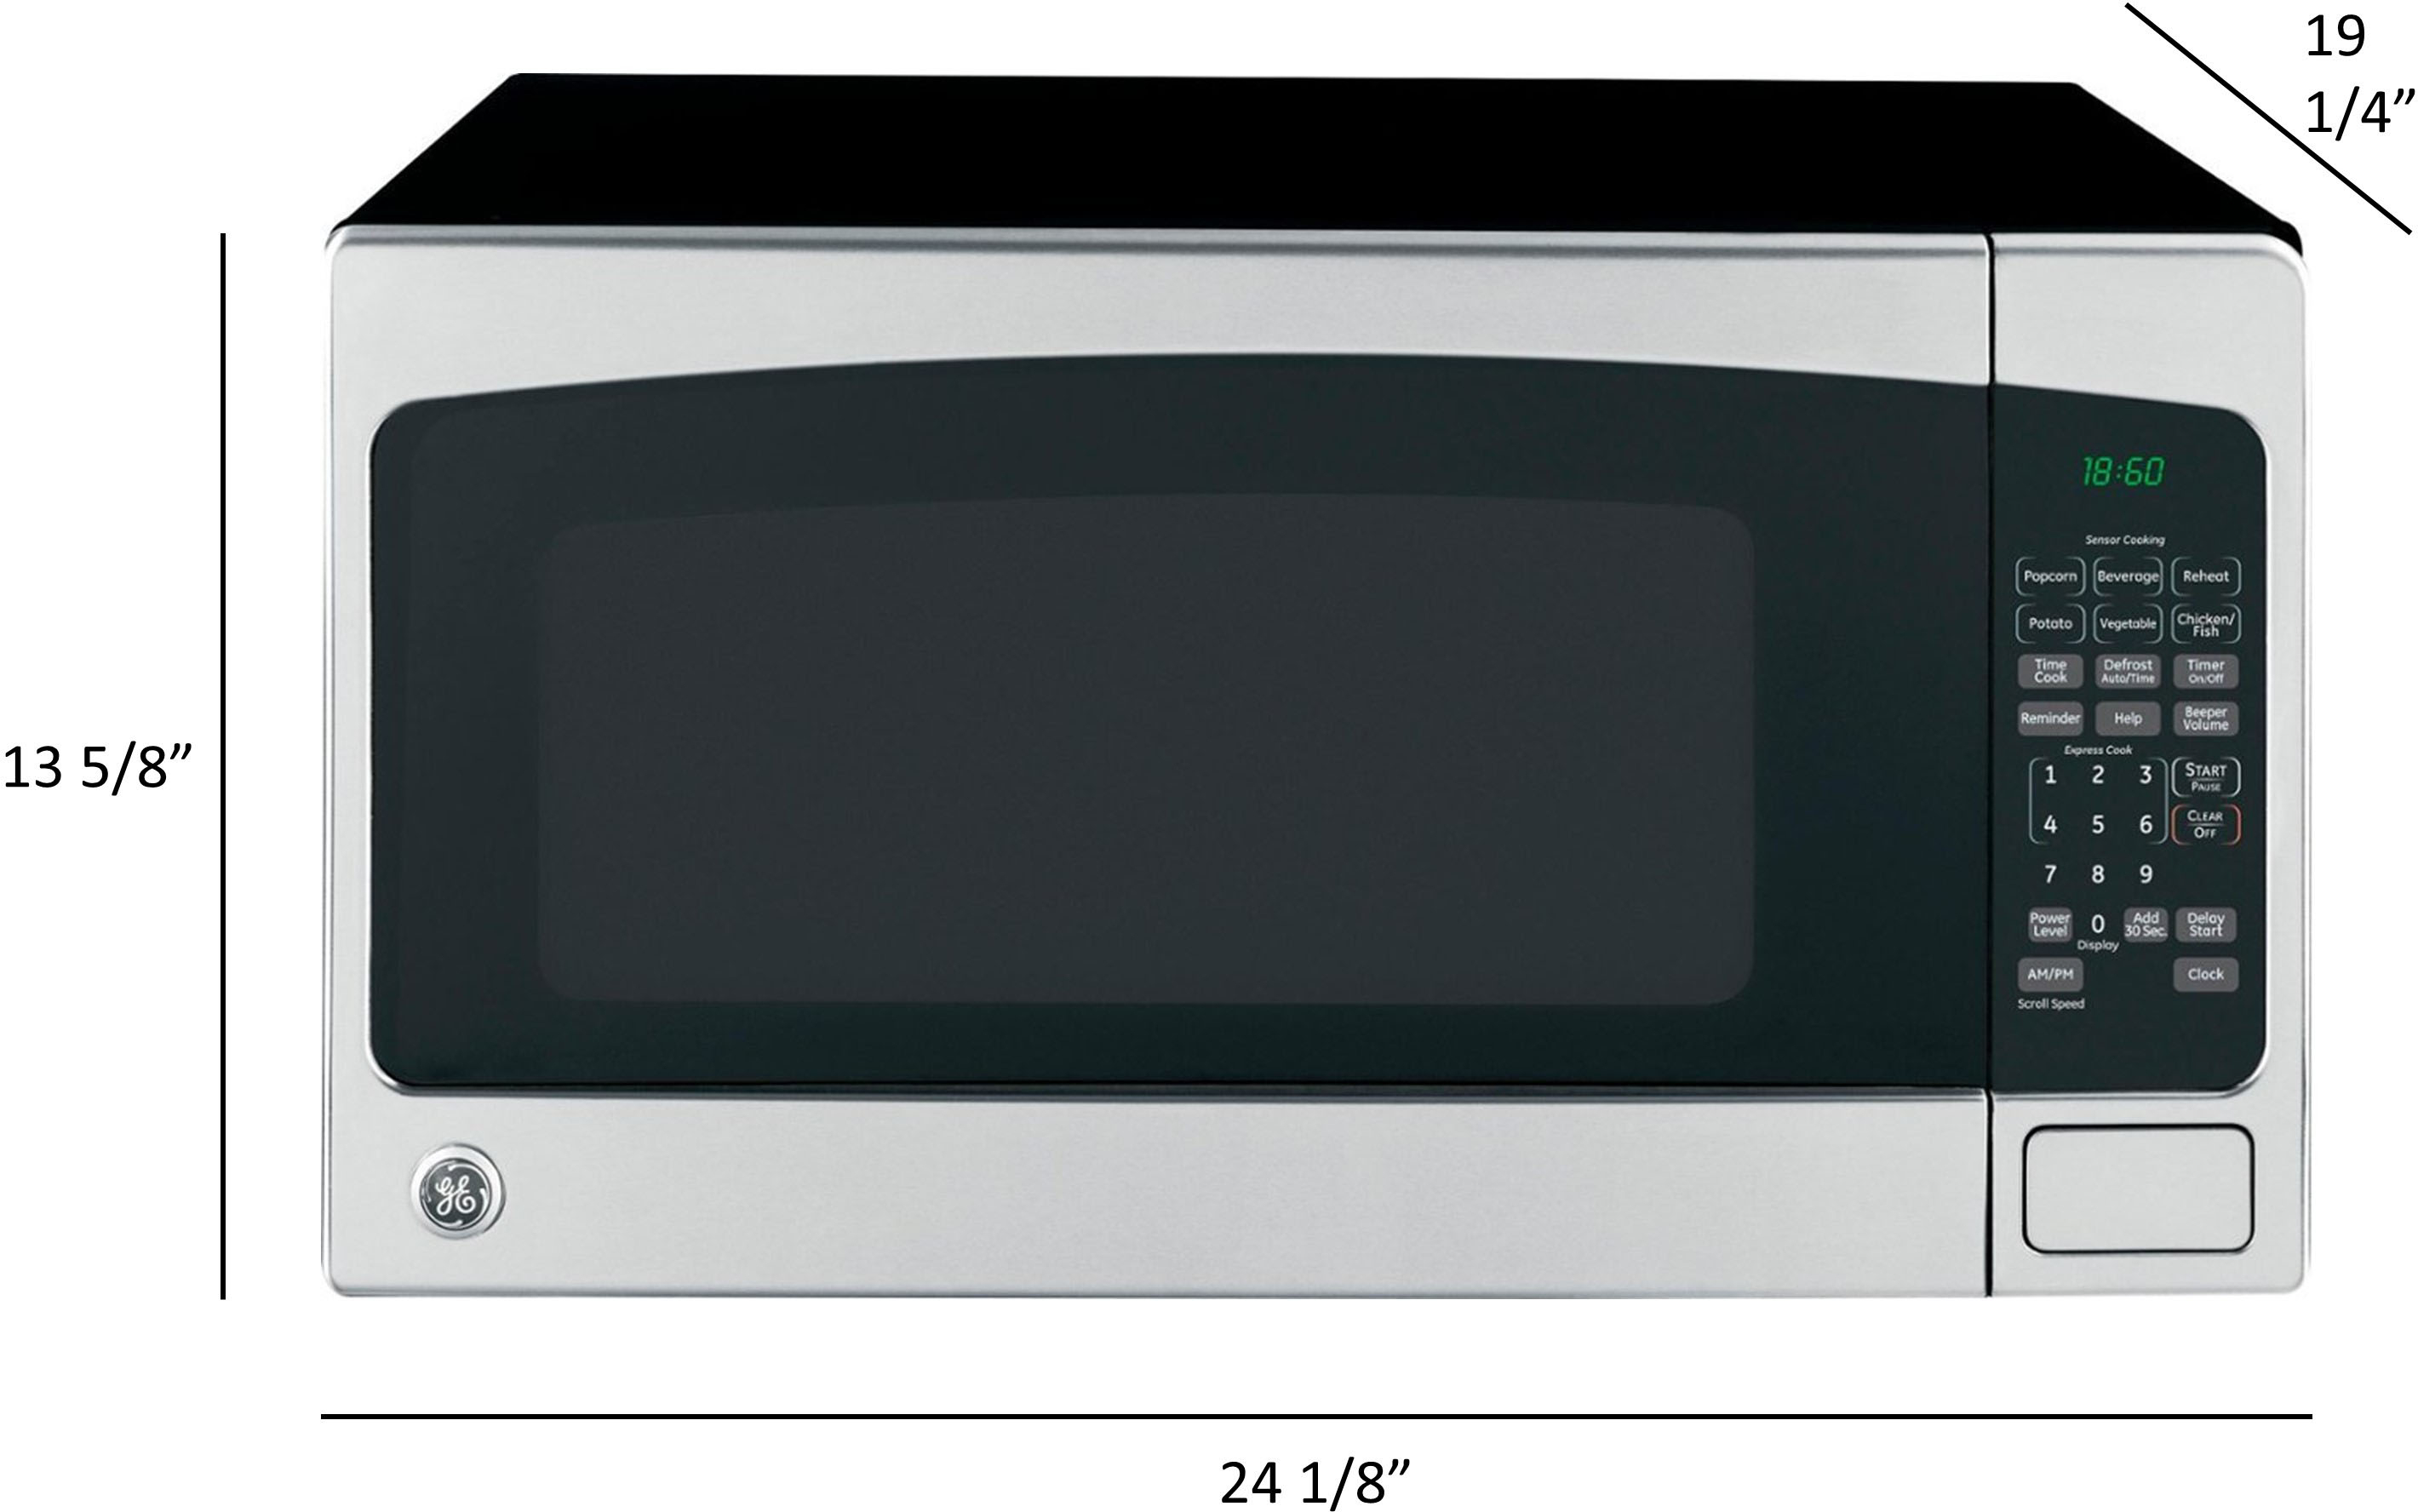 Best Buy: GE 1.1 Cu. Ft. Mid-Size Microwave Stainless Steel